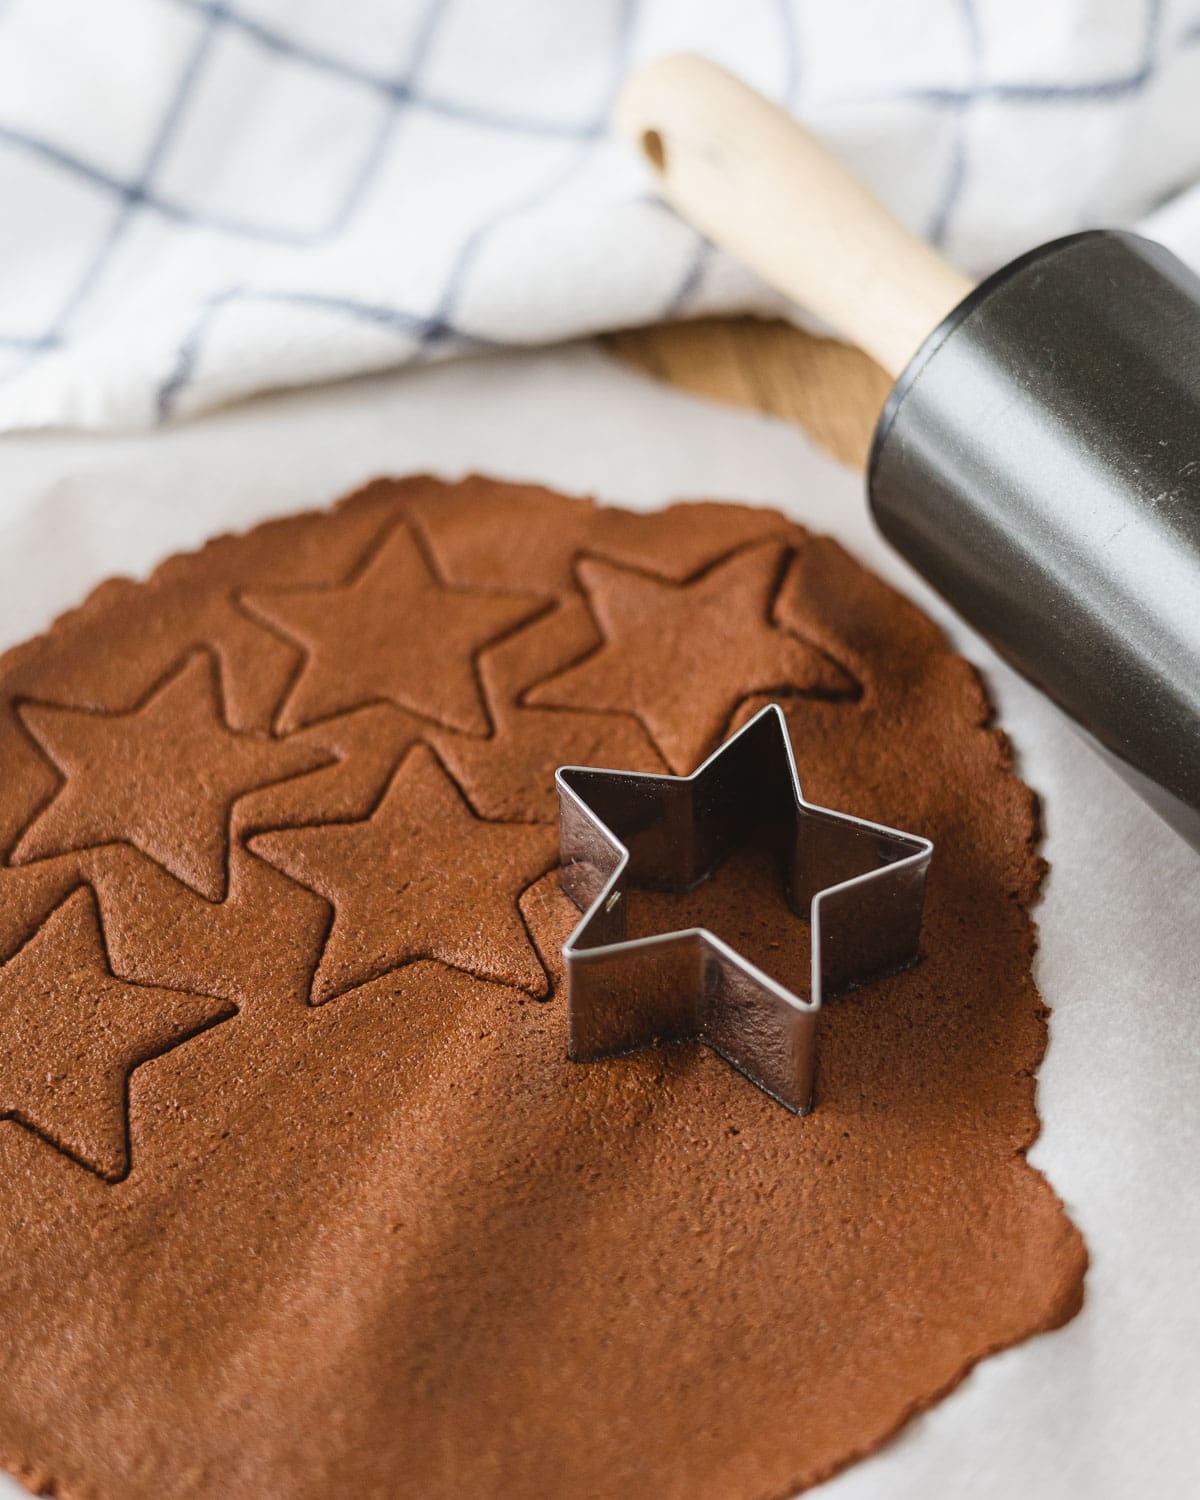 Rolling out 2-ingredient cinnamon-applesauce dough and cutting star shapes with a cookie cutter.